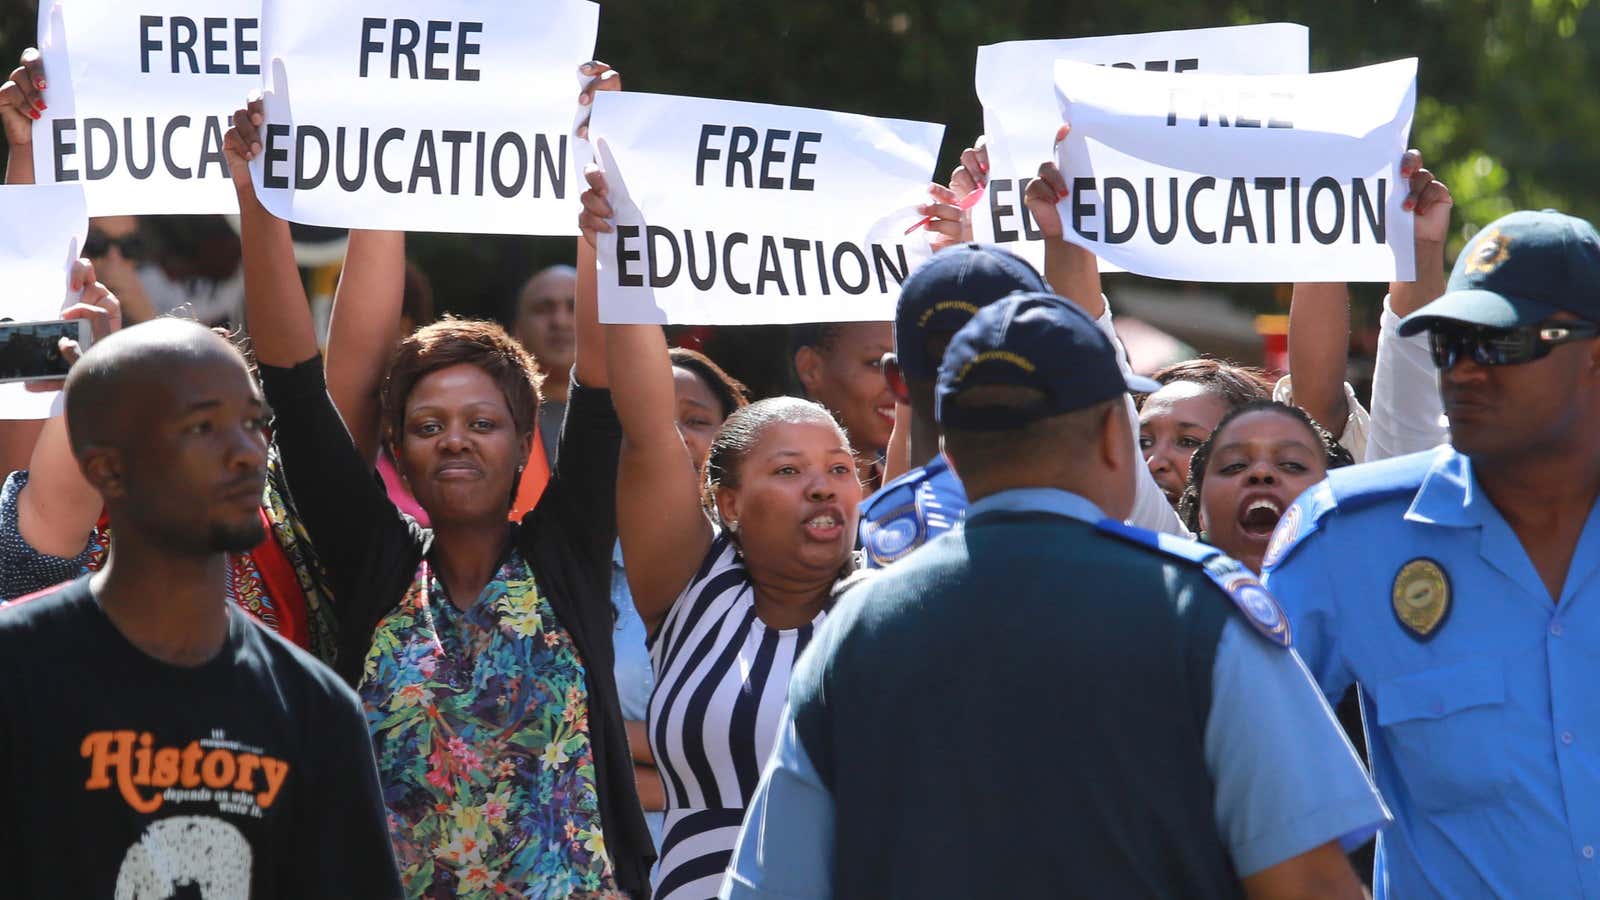 The call for free education continues.